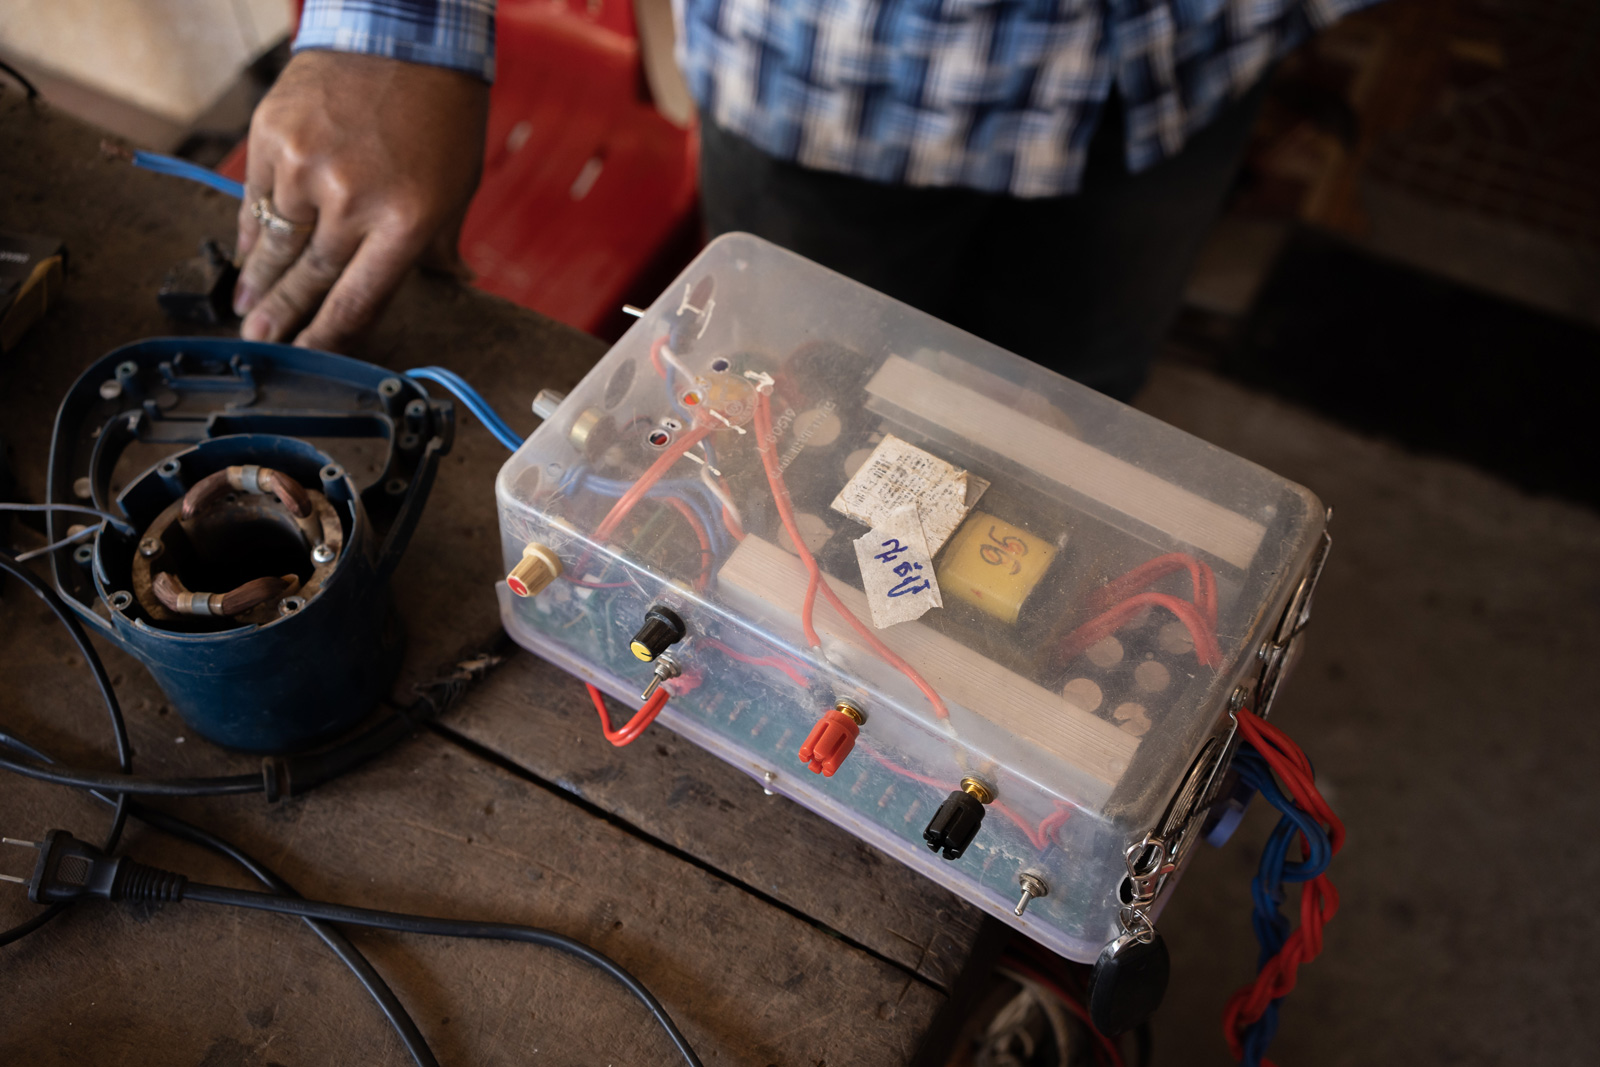 A homemade electric fishing kit that had been brought in to a hardware shop in Kratie’s provincial capital by Vietnamese-Cambodian fishers for repair.